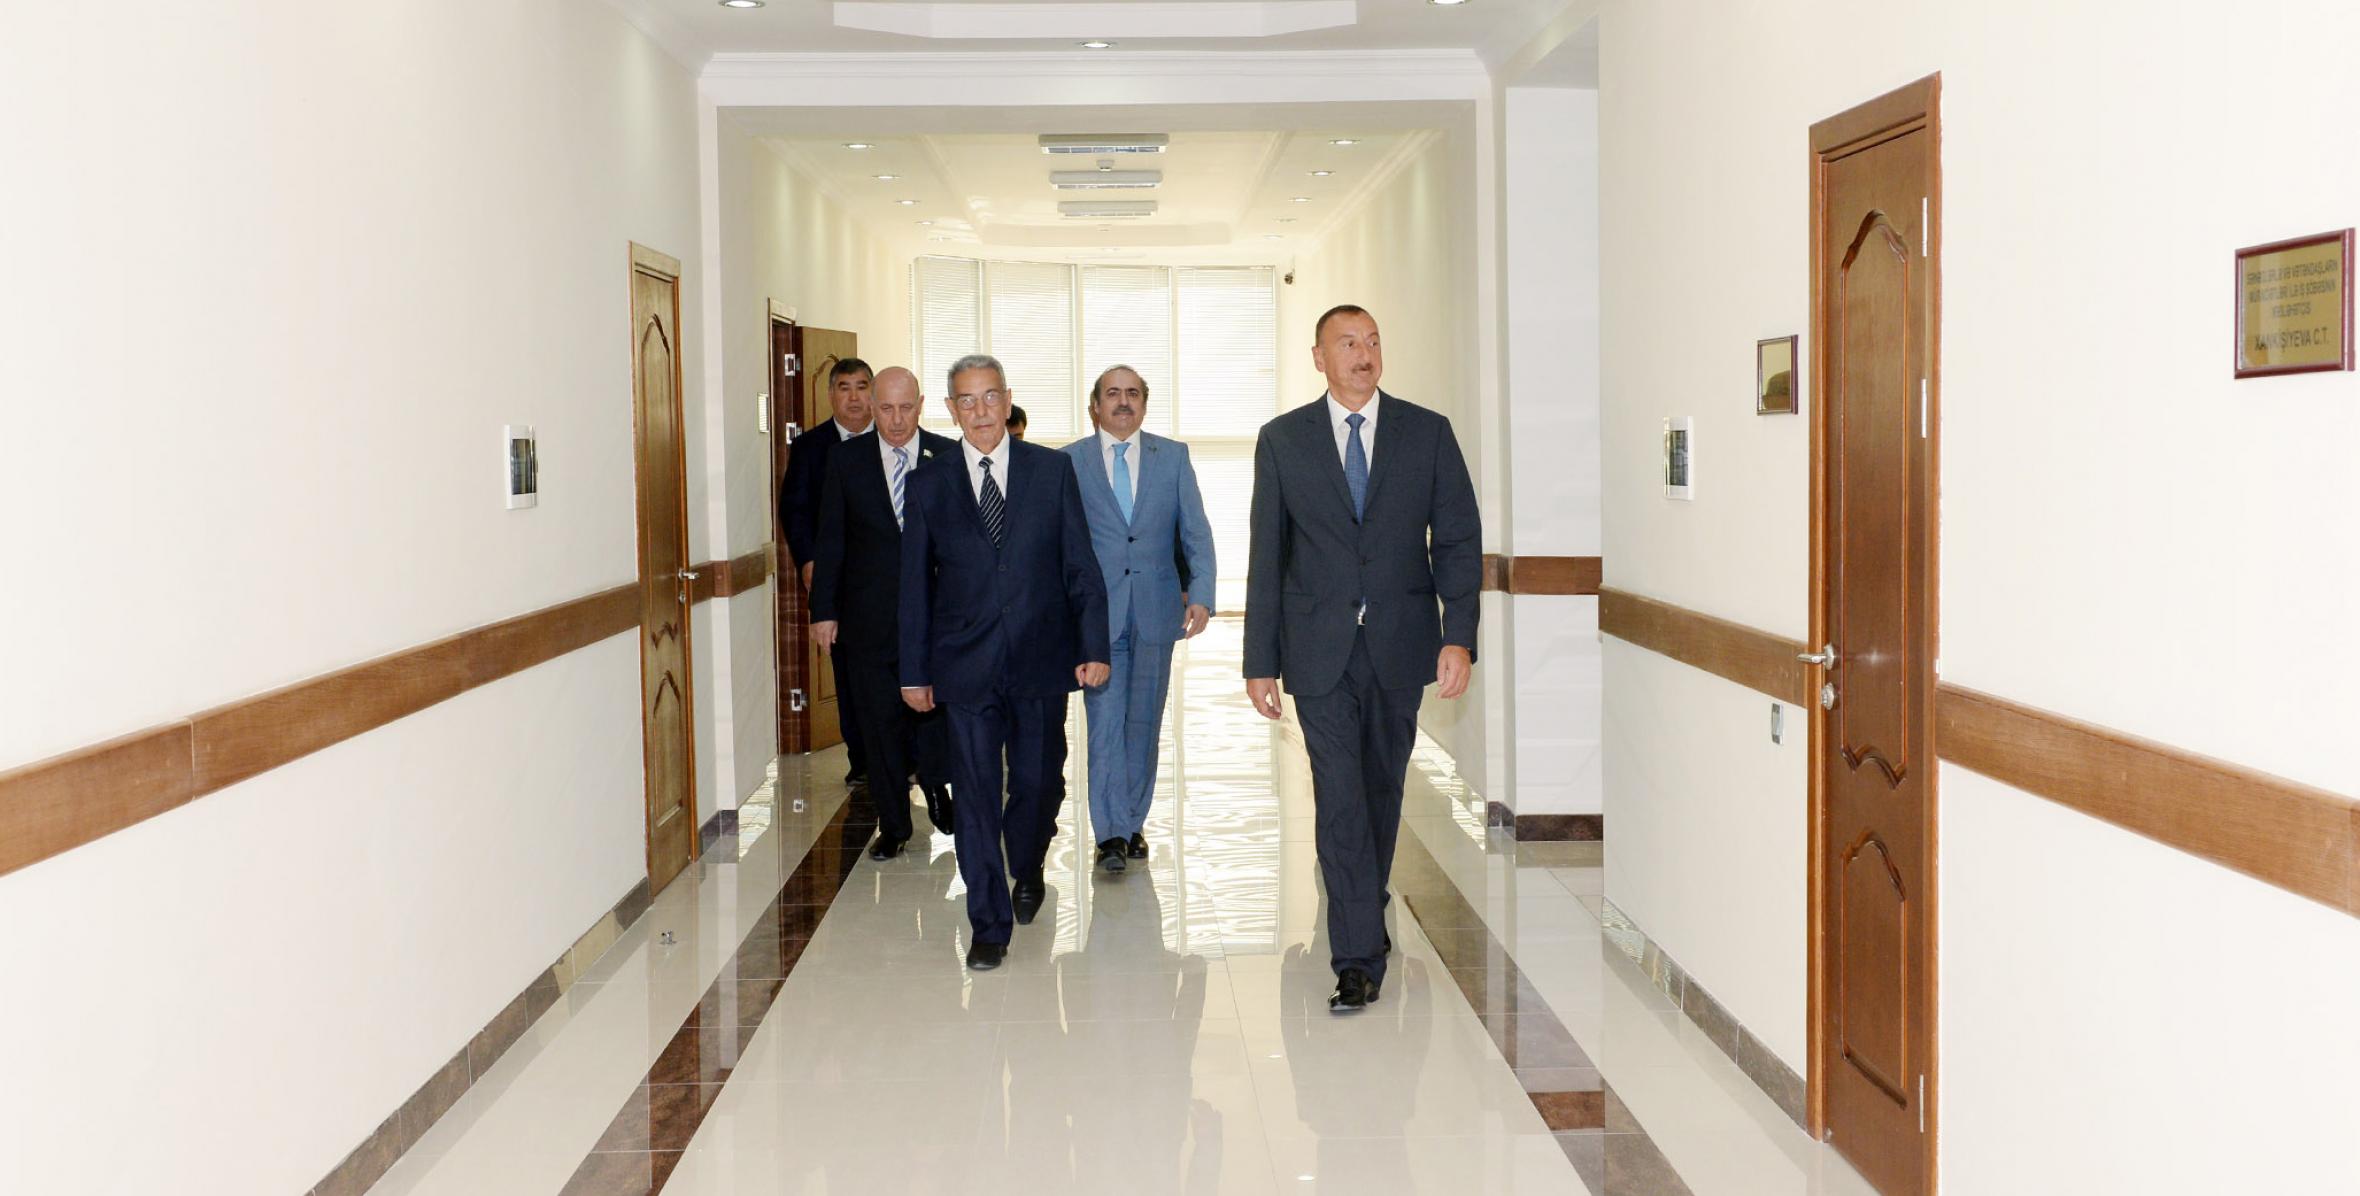 Ilham Aliyev reviewed the building of the Kurdamir District Executive Authority